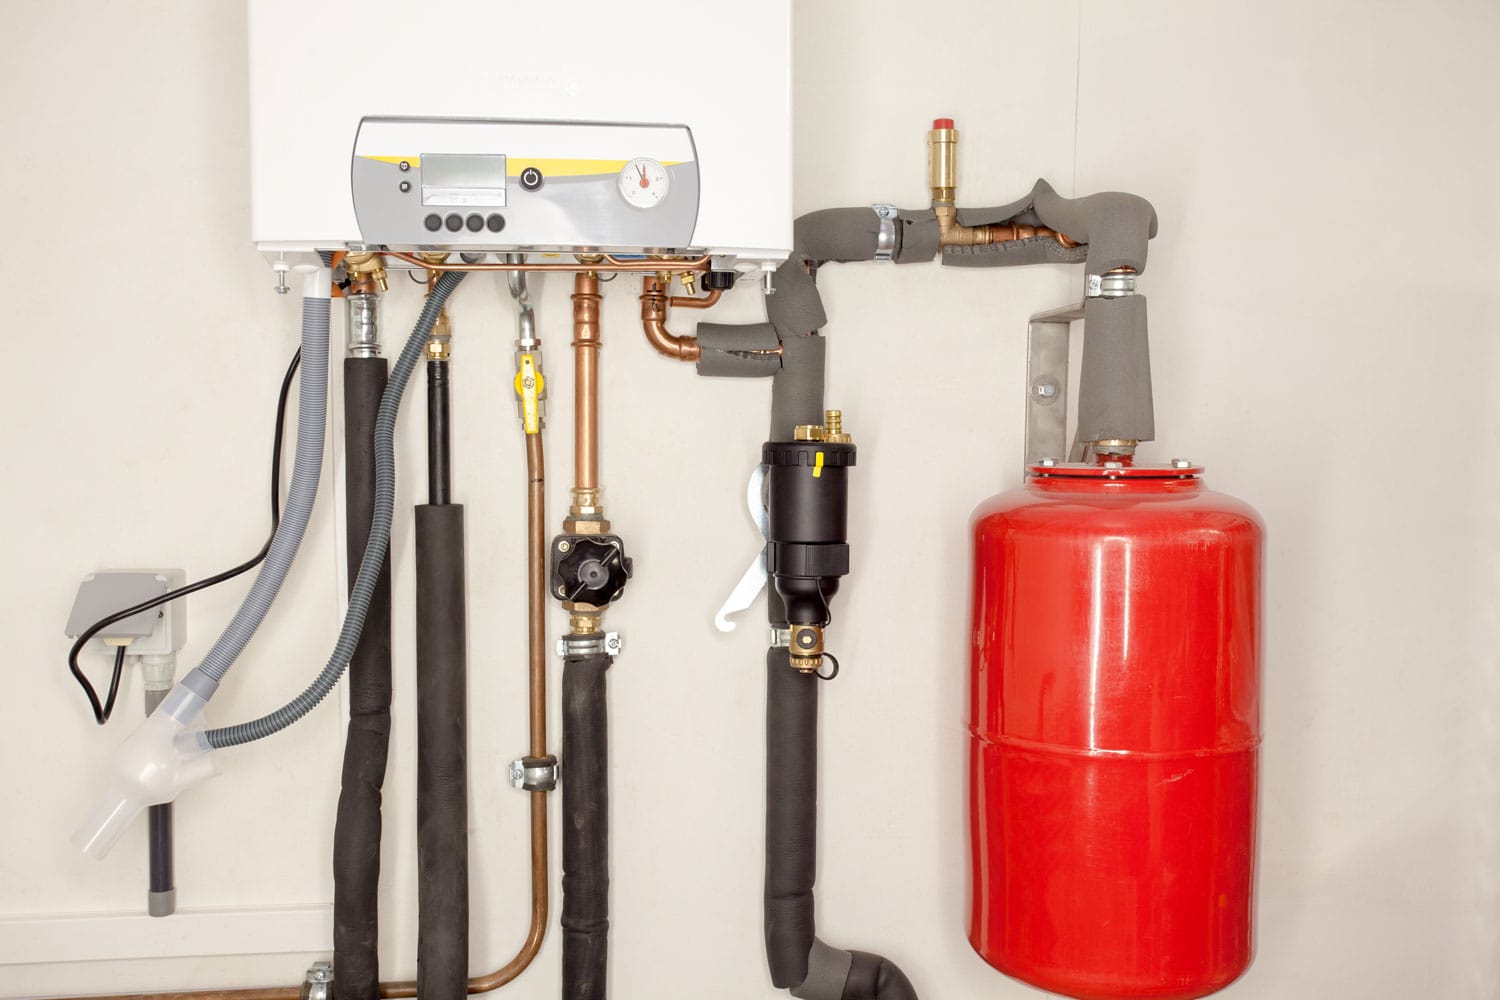 A water heater and boiler for a bathroom